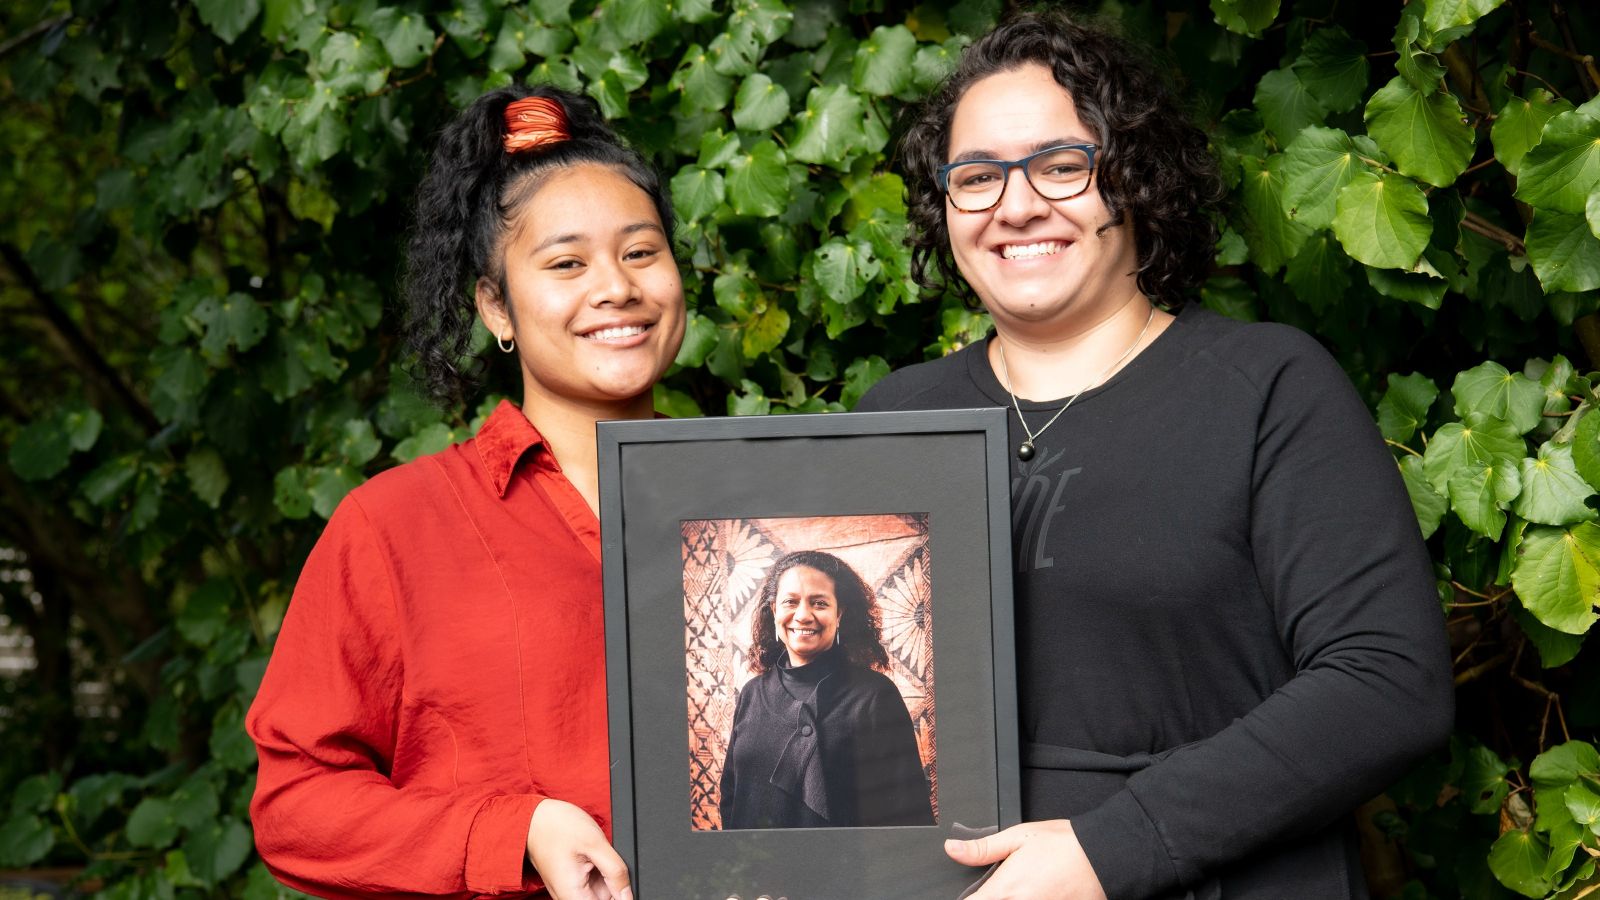 Kaitlin Abbot and Esther Patu, the two scholarship recipients, holding a framed picture of Teresia Teaiwa 